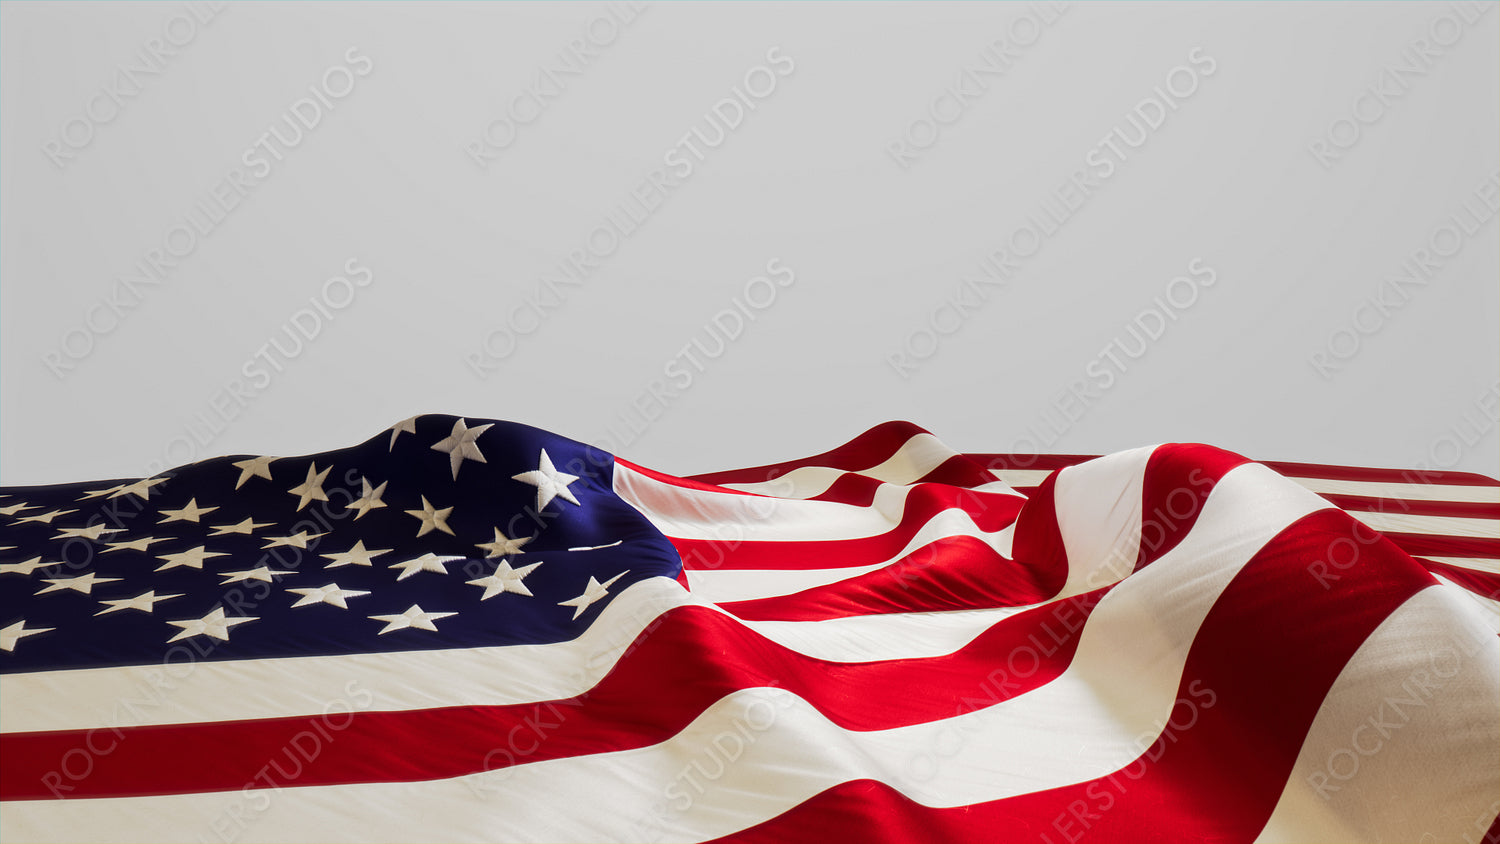 Patriot Day Banner. Authentic Holiday Background featuring United States Flag Isolated on White with Copy-Space.